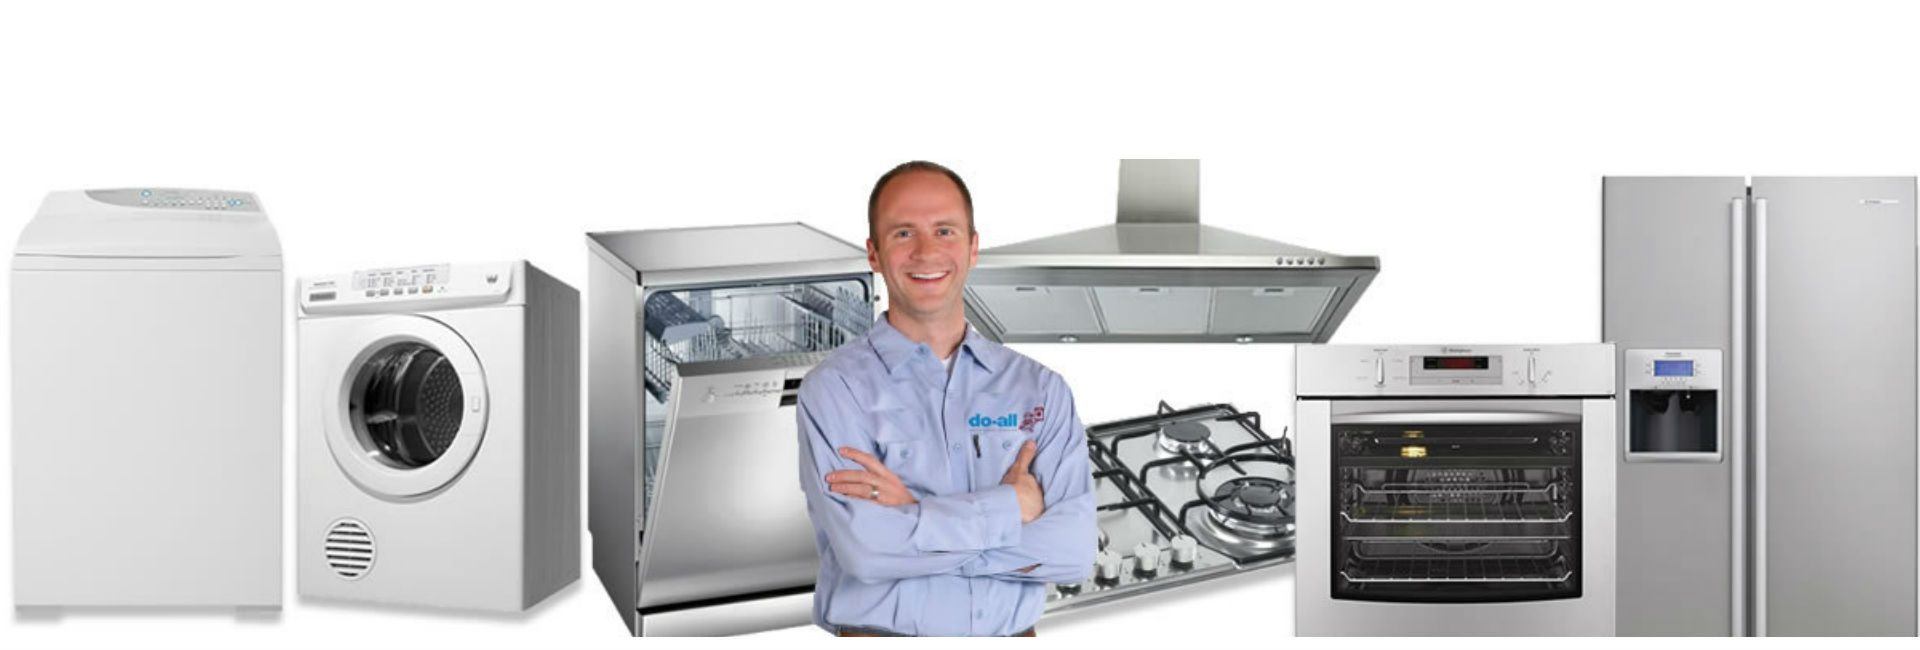 Melbourne's leading appliance servicing and repair people 